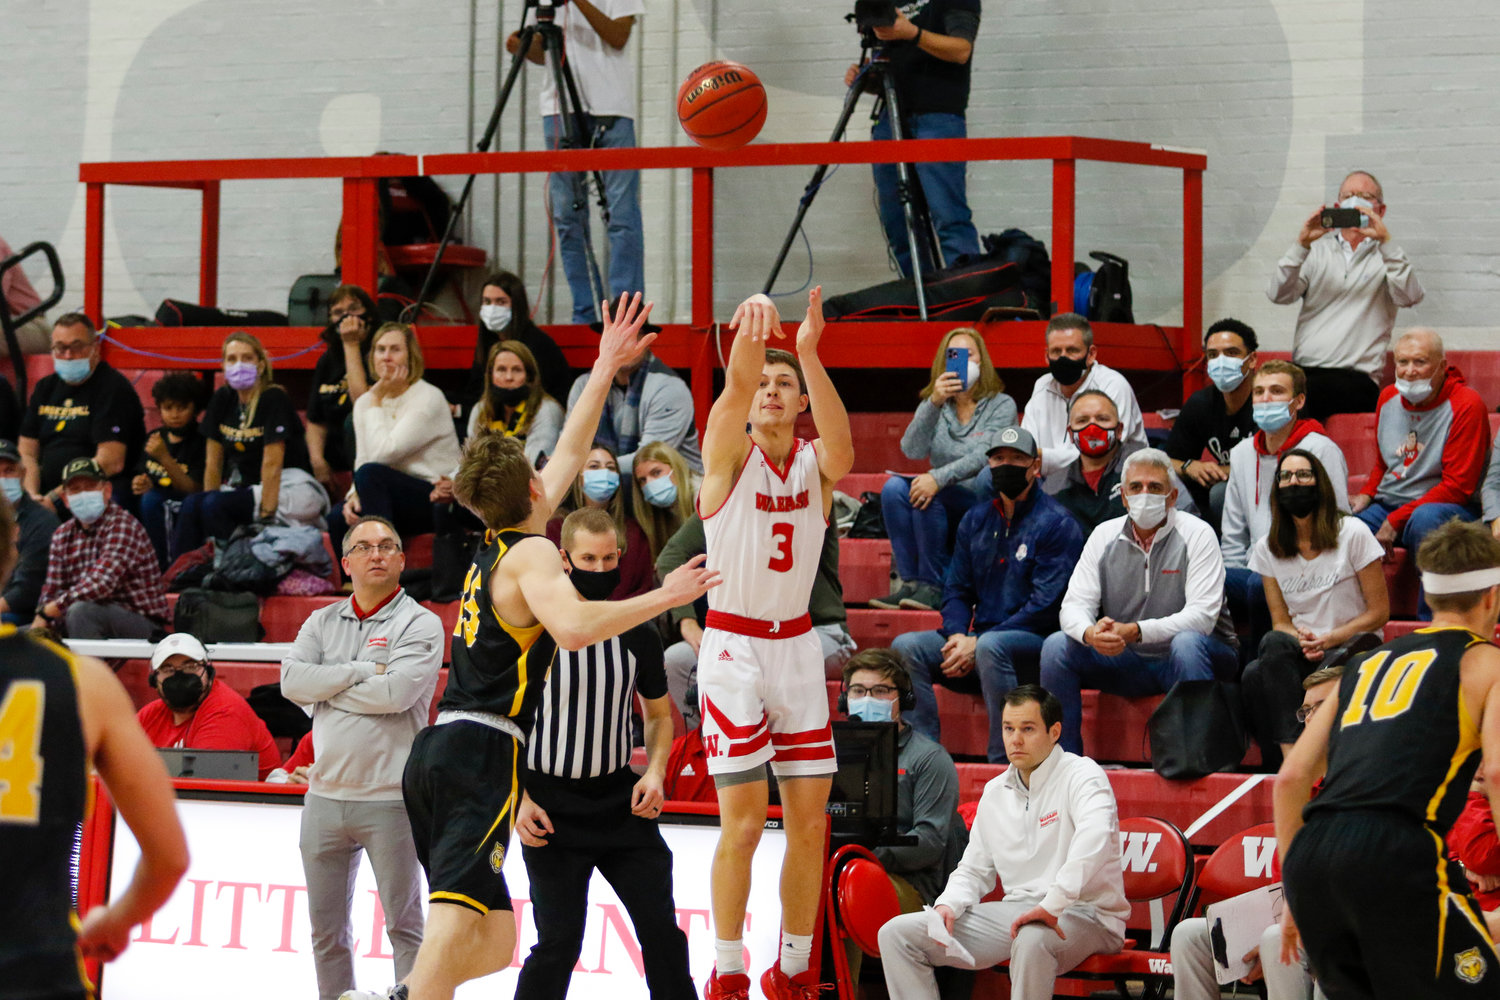 Senior guard Jack Davidson drills the three to go over the 2,000 point mark for his career. Davidson scored 23 points for the Little Giants and needs just needs 61 points to be the all-time leading scorer in school history.